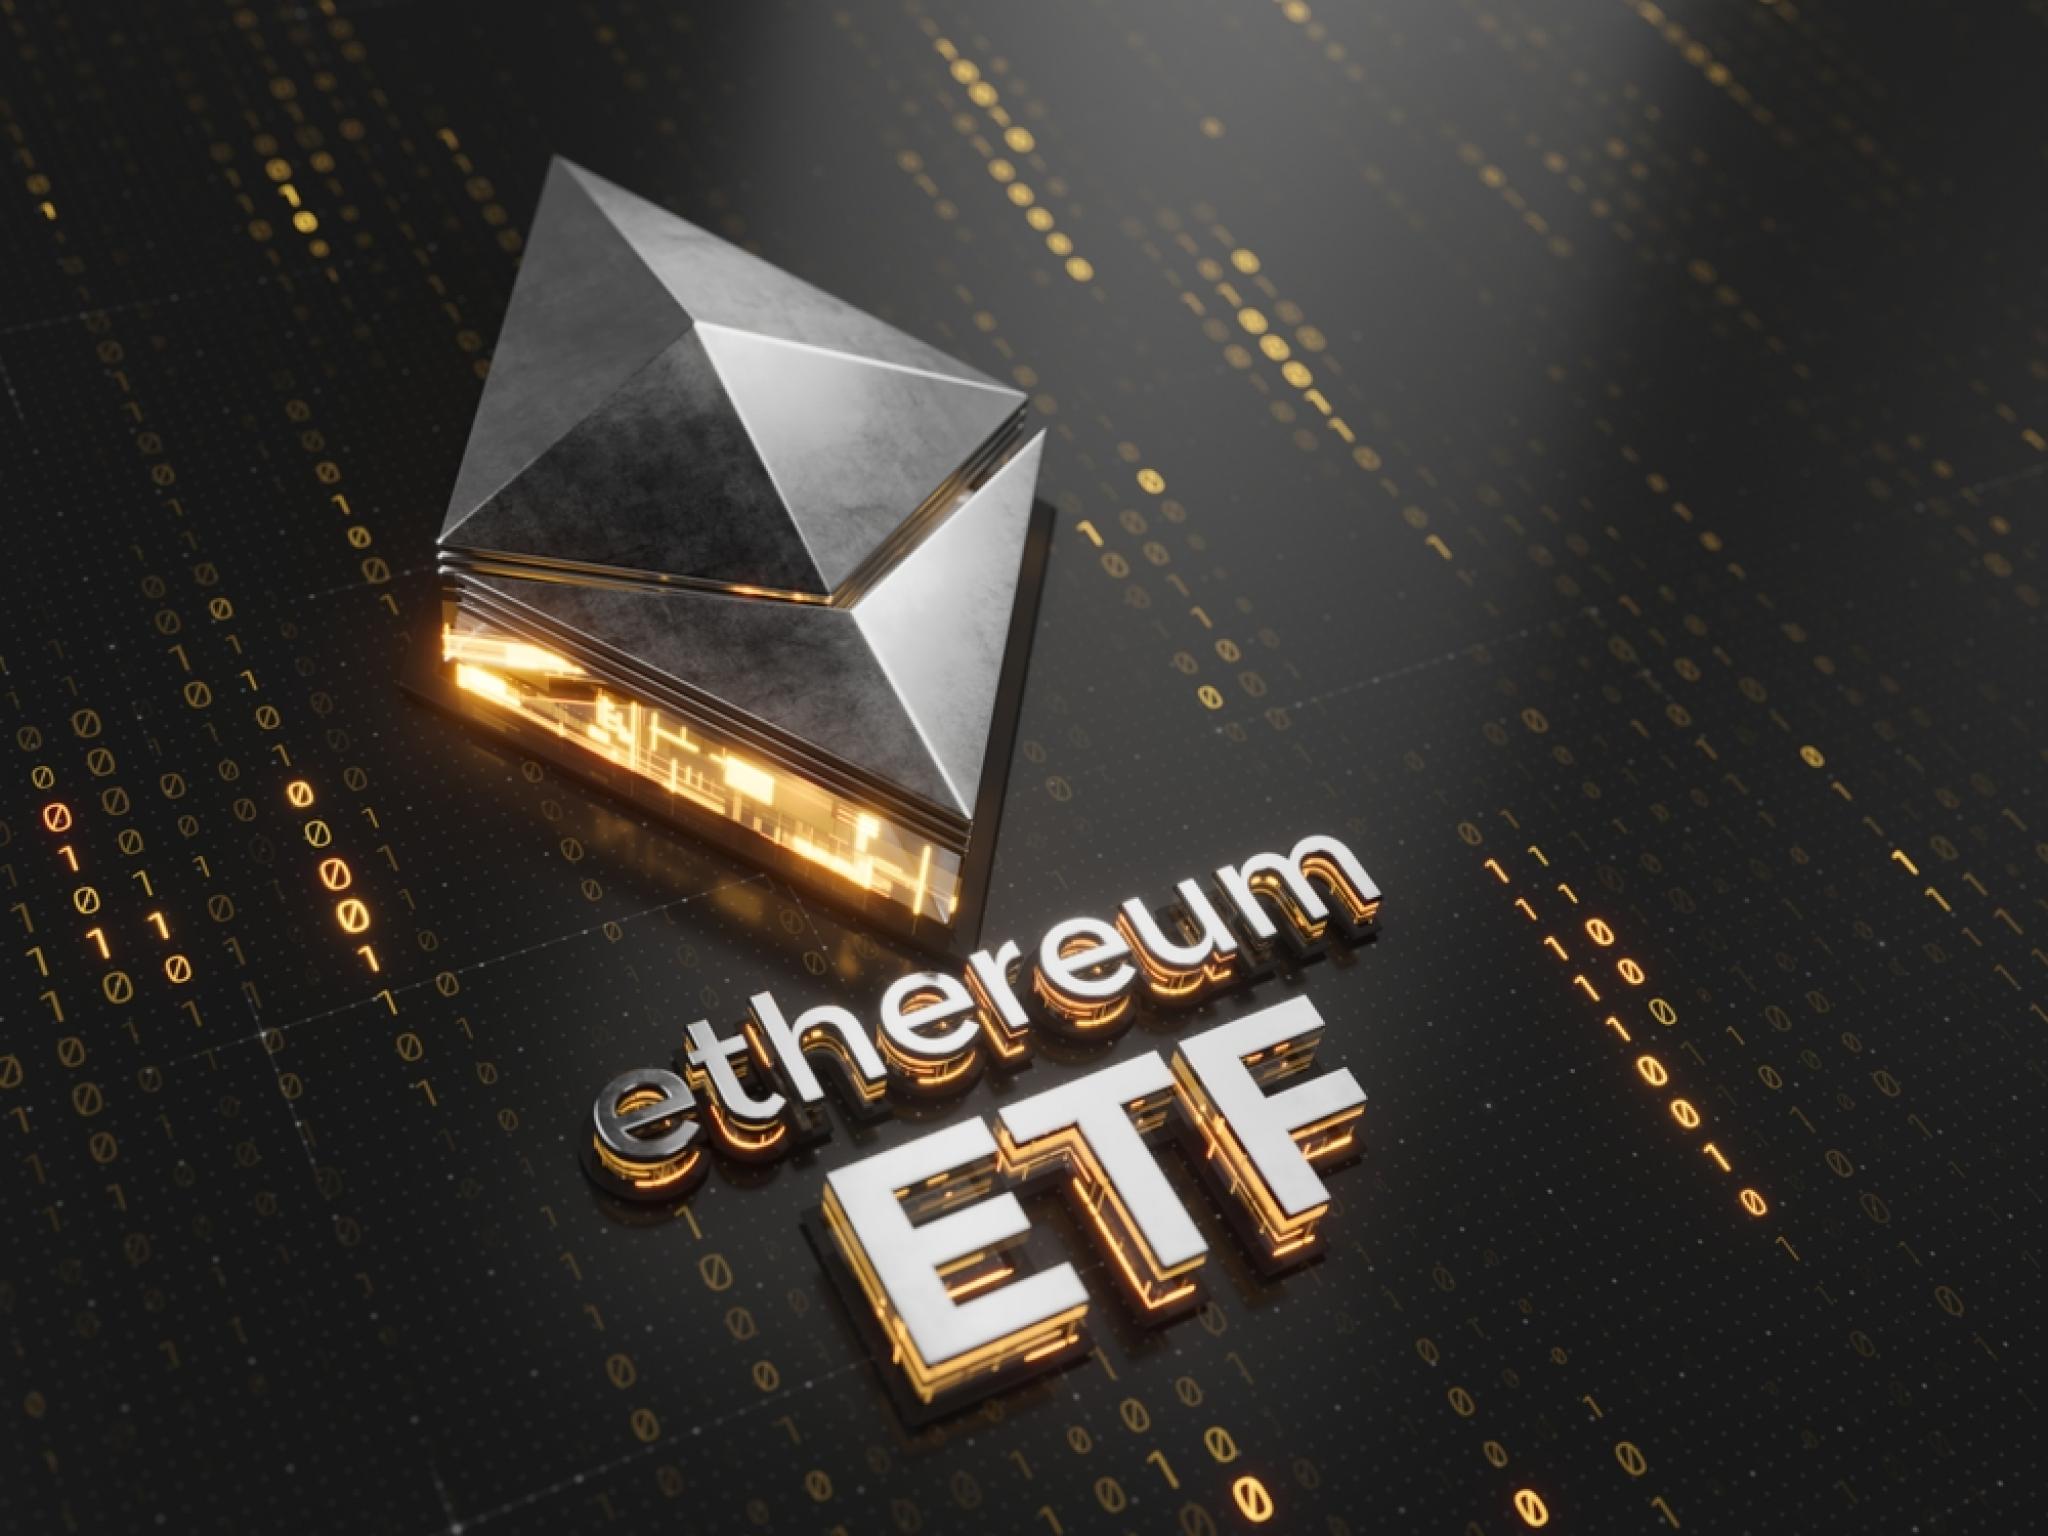  ethereum-spot-etfs-on-the-horizon-regulatory-approval-expected-by-fourth-of-july-report 